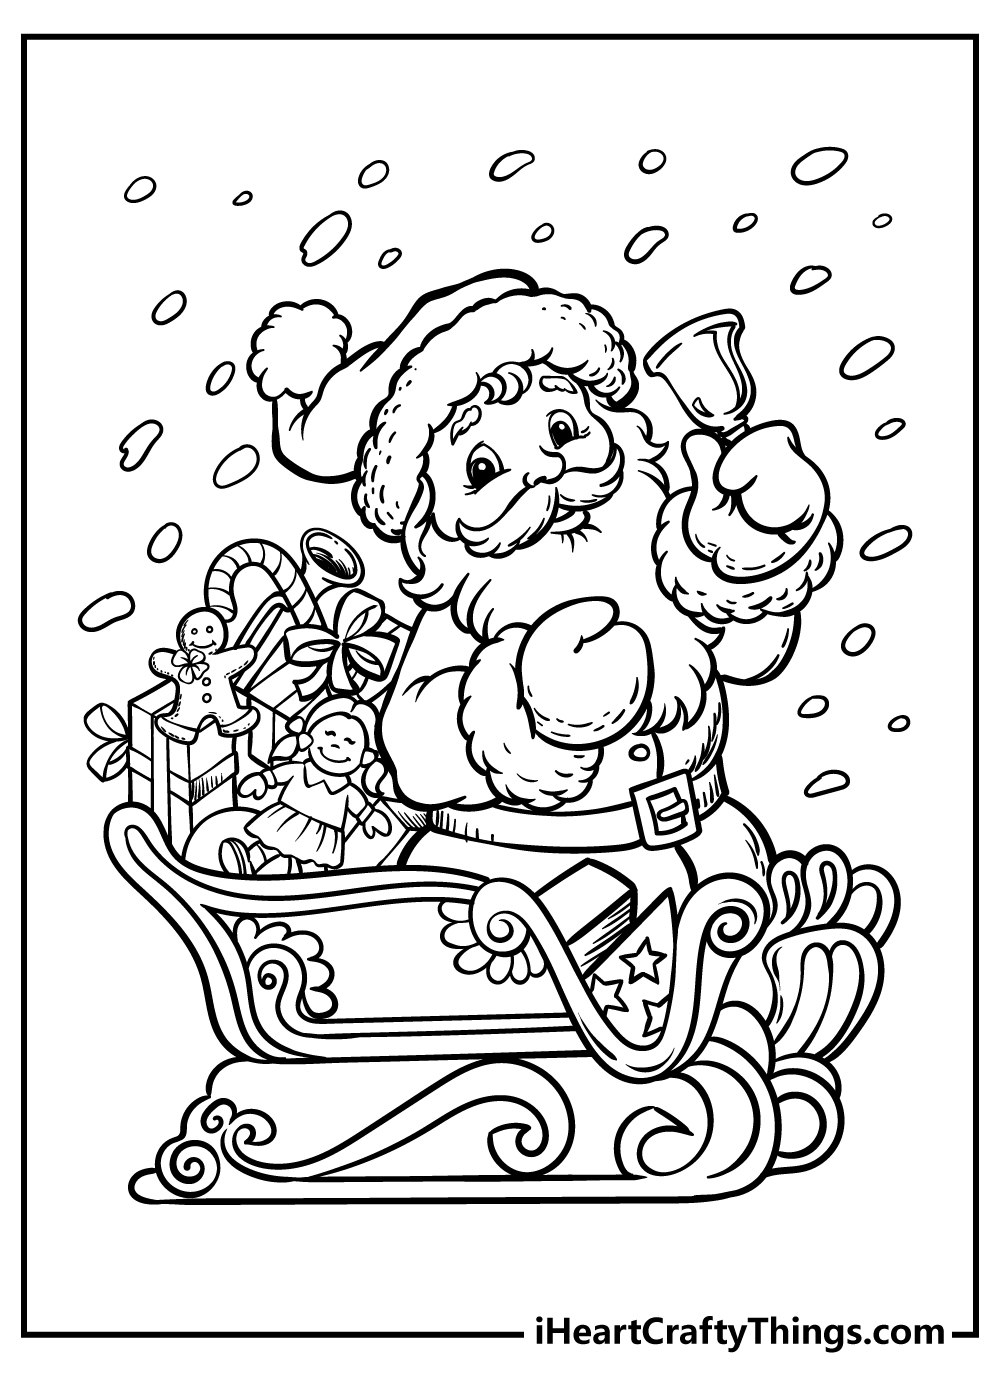 Christmas Coloring Book for adults free download